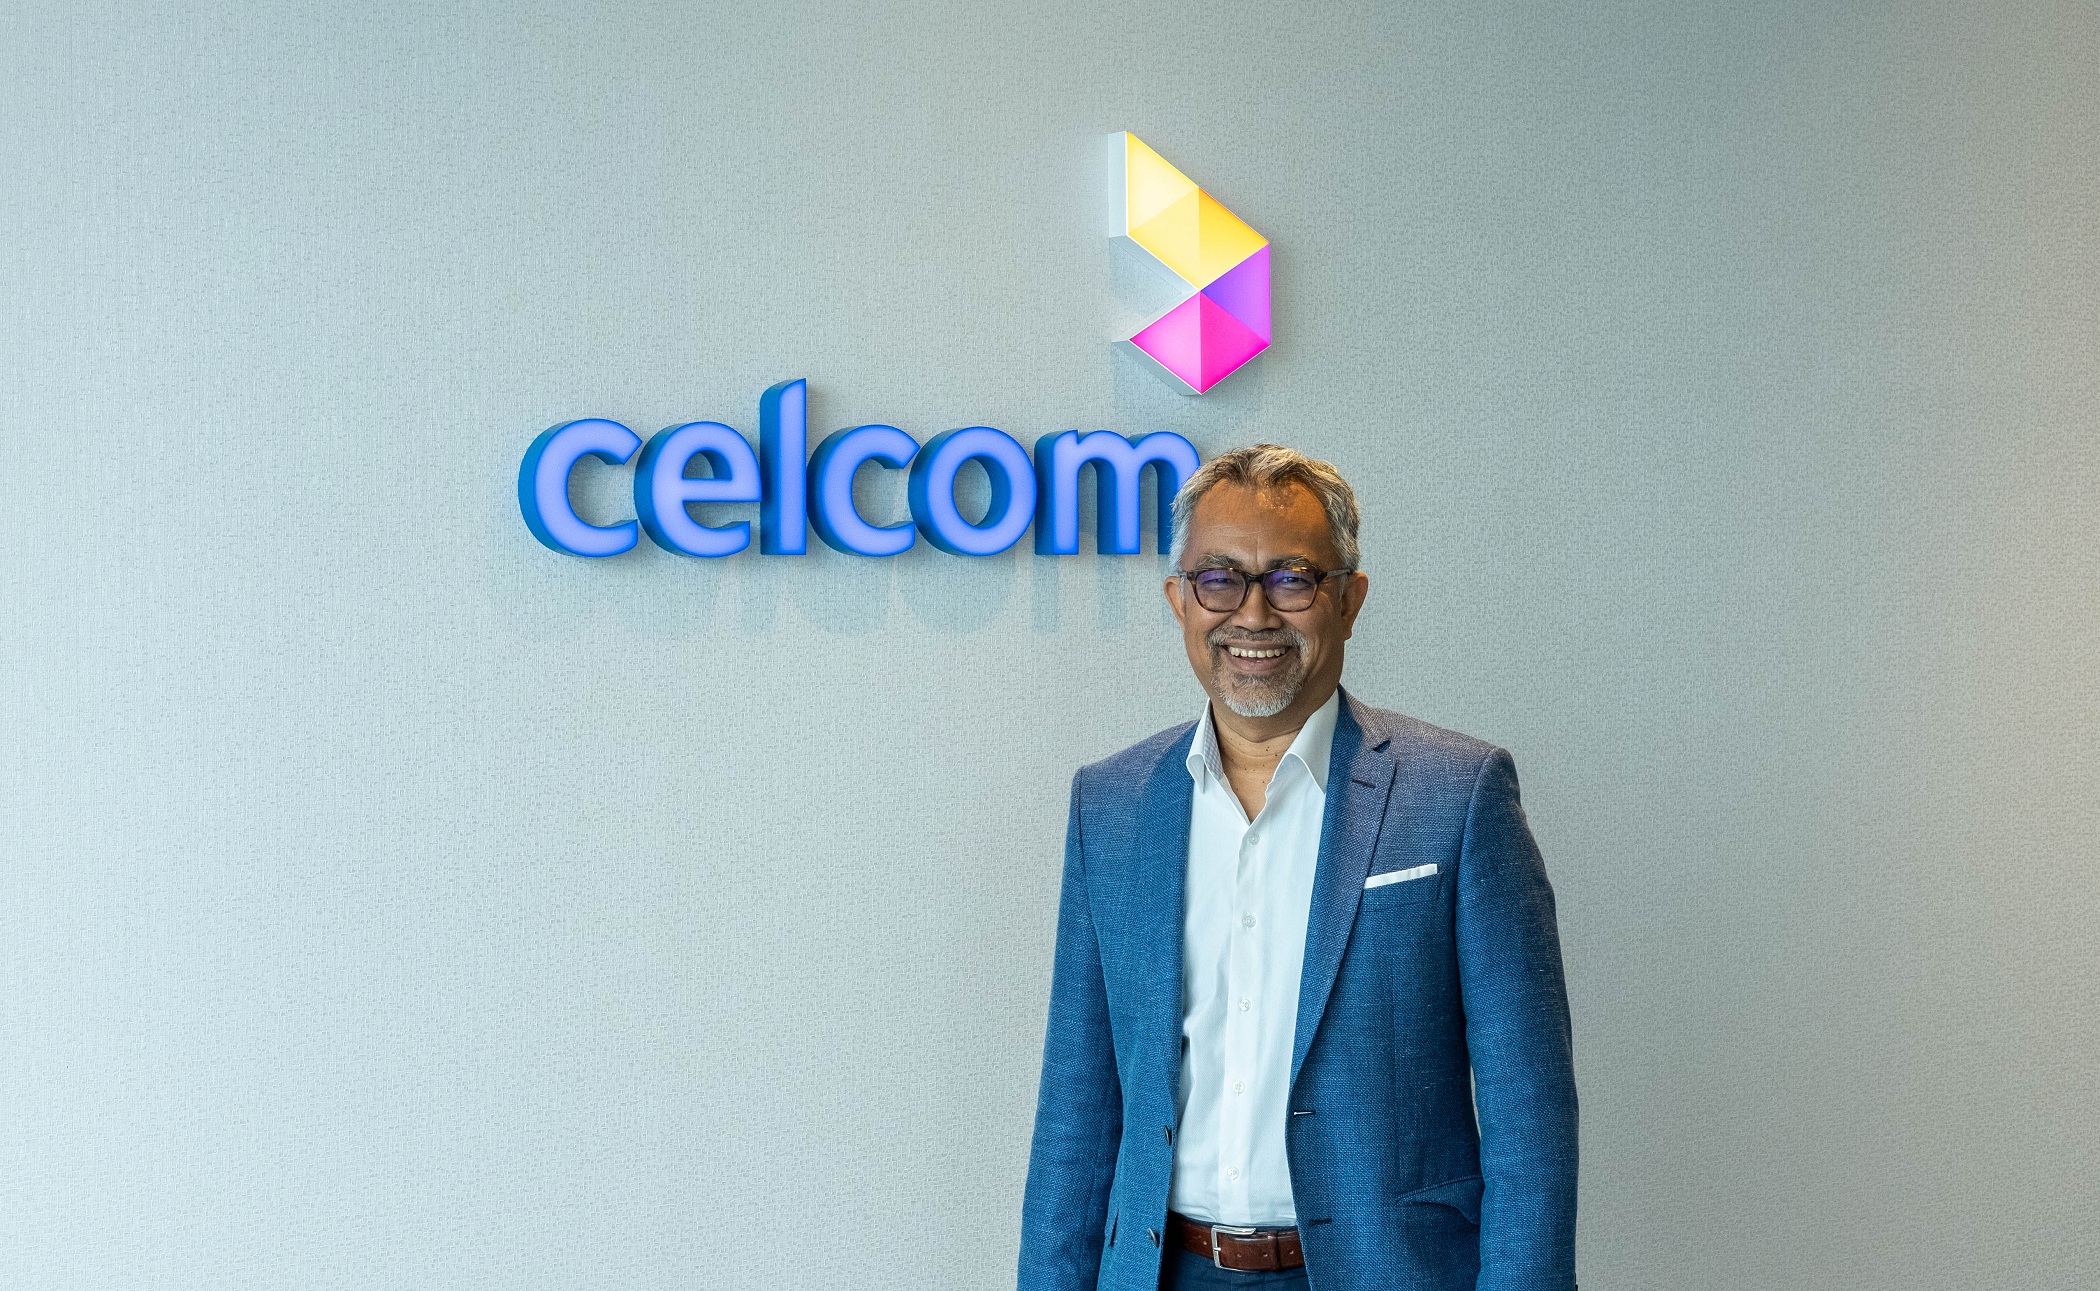 Picture 1 Idham Nawawi CEO of Celcom